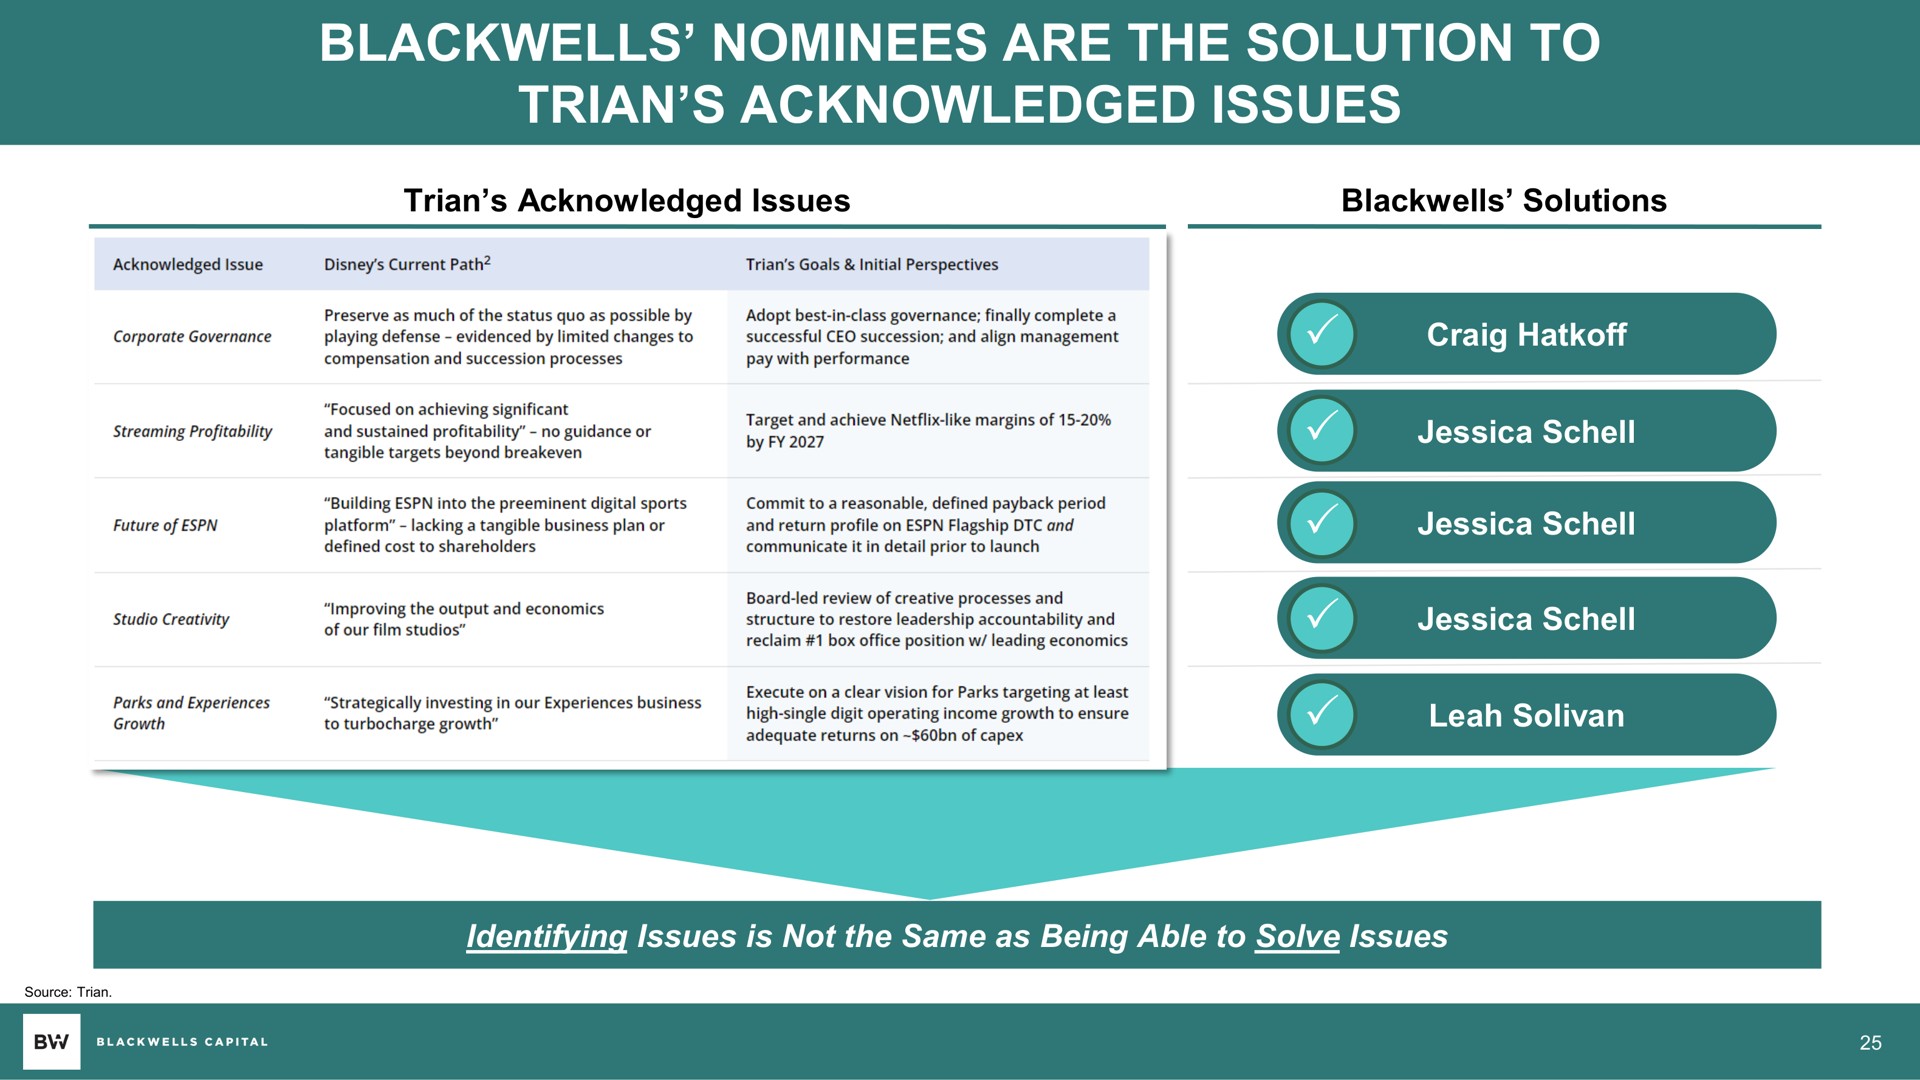 nominees are the solution to acknowledged issues | Blackwells Capital